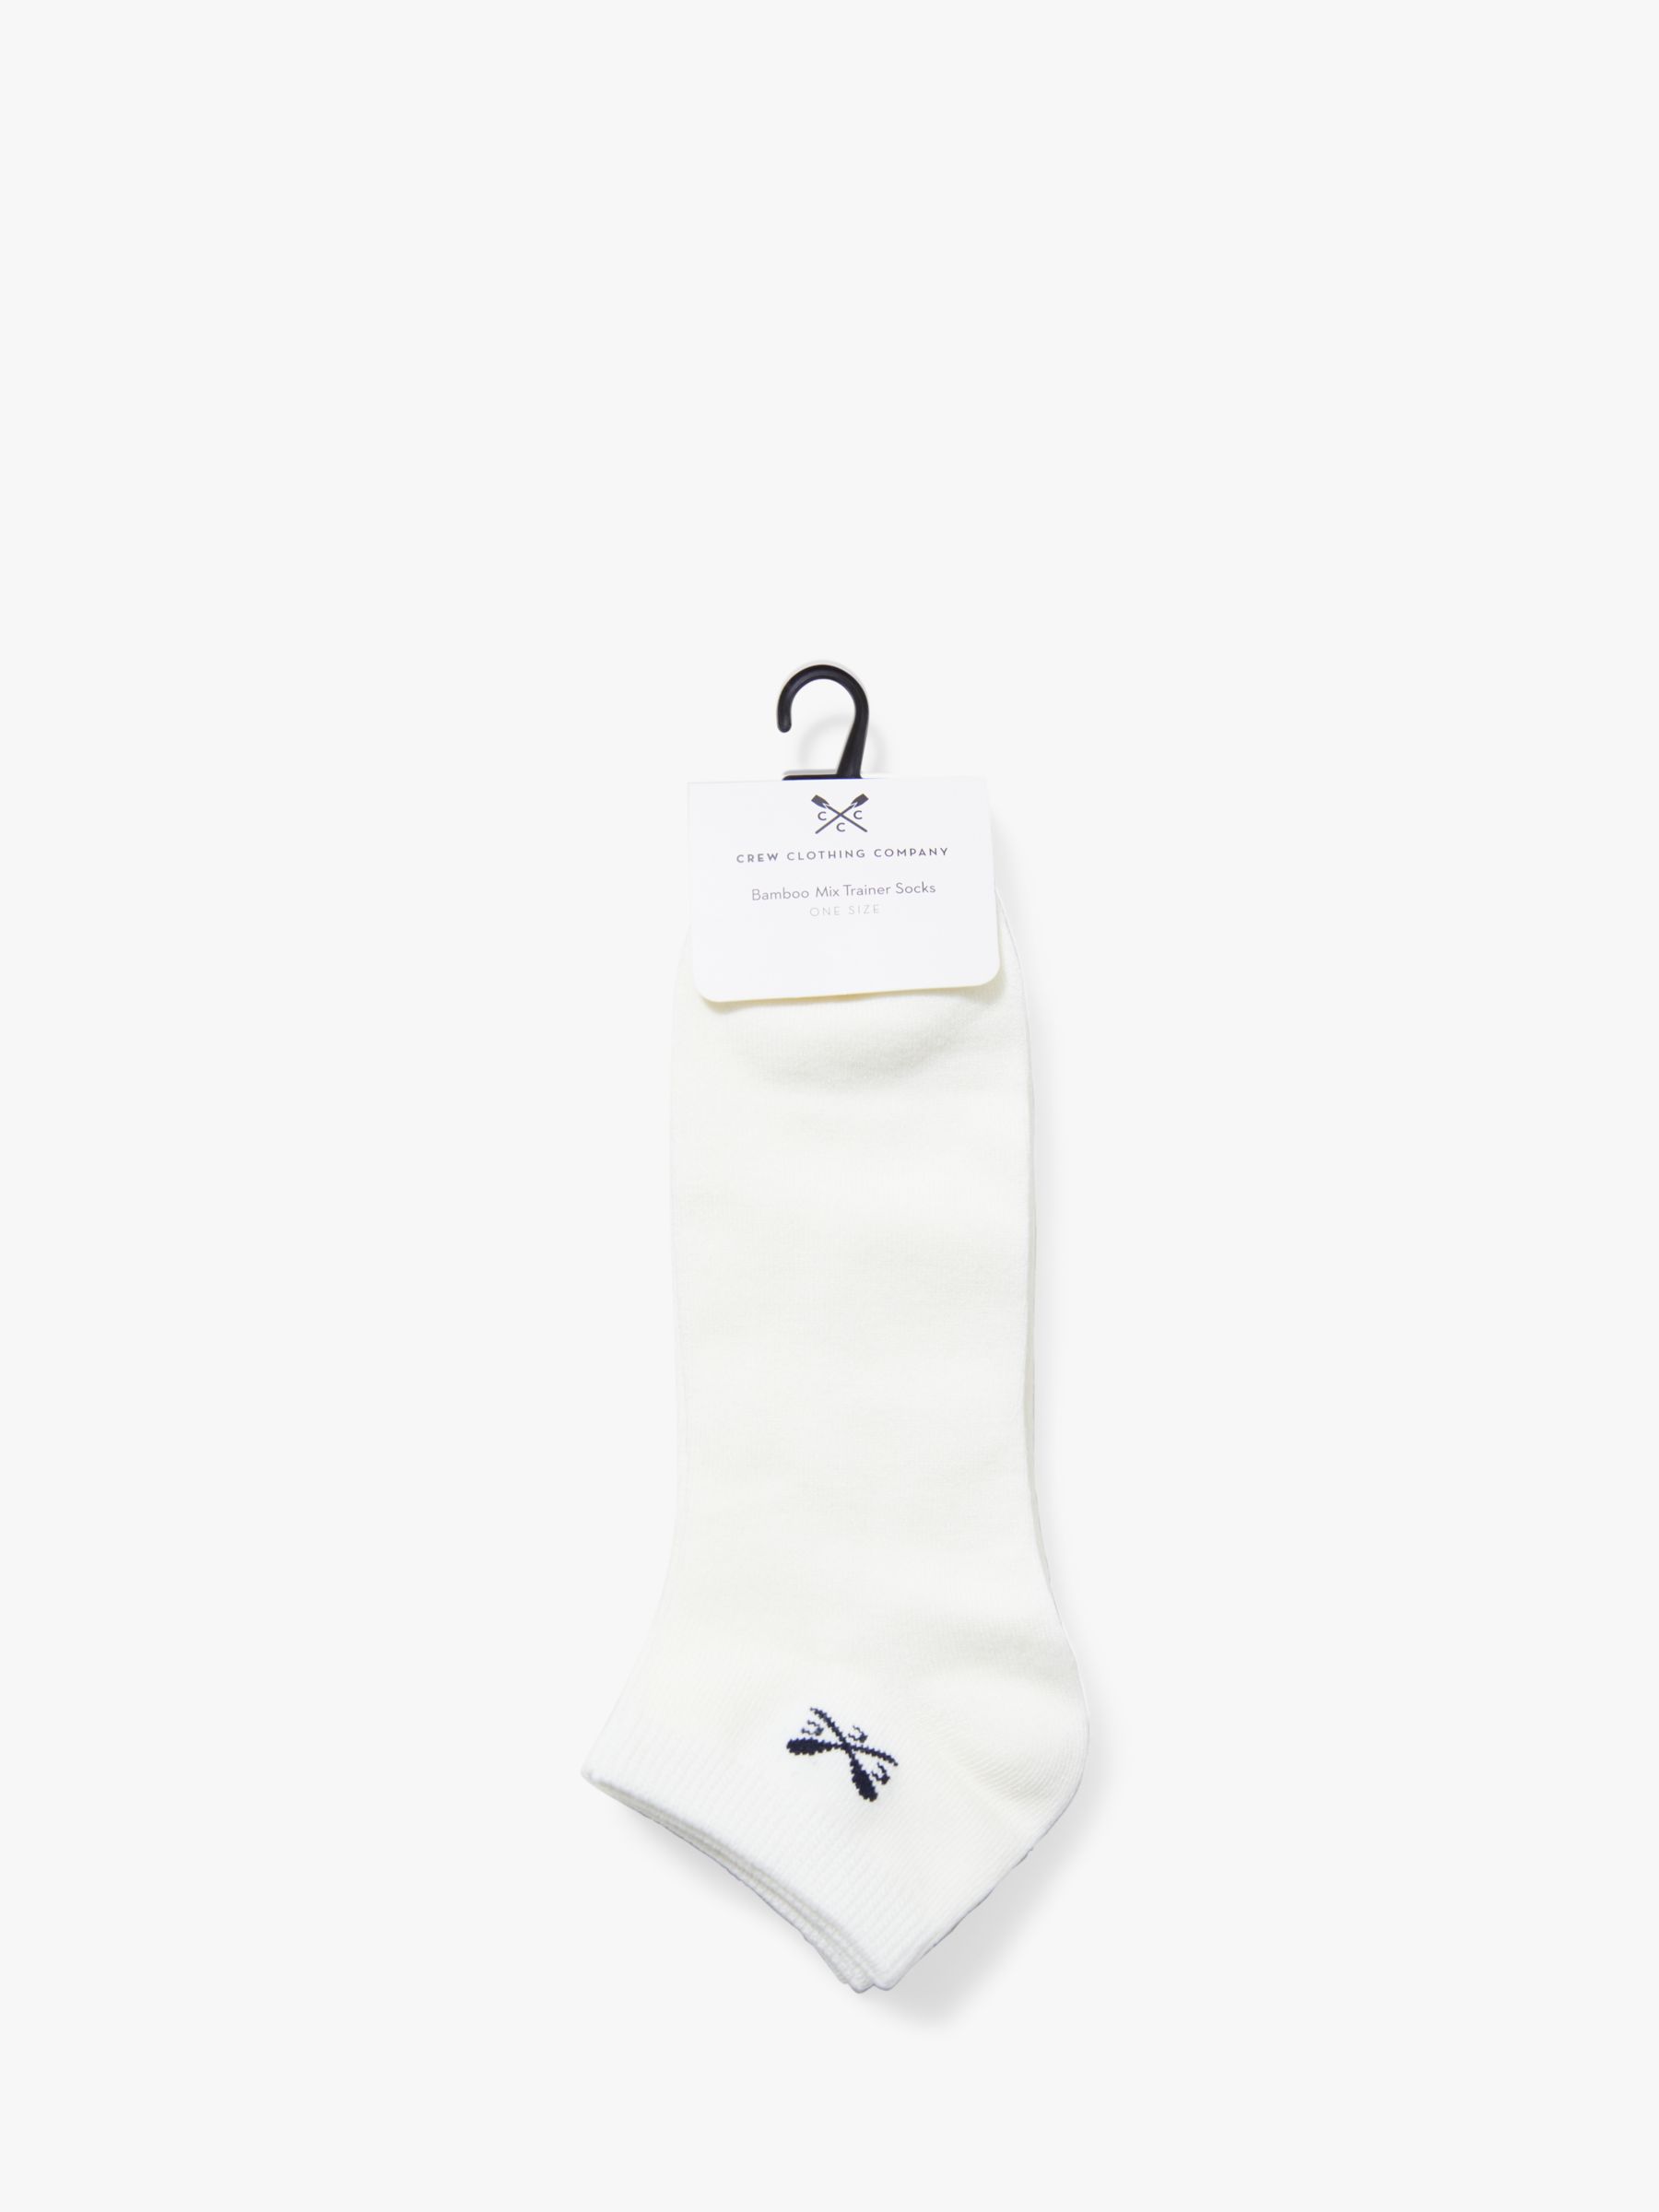 Crew Clothing Bamboo Trainer Socks, Pack of 3, White, One Size